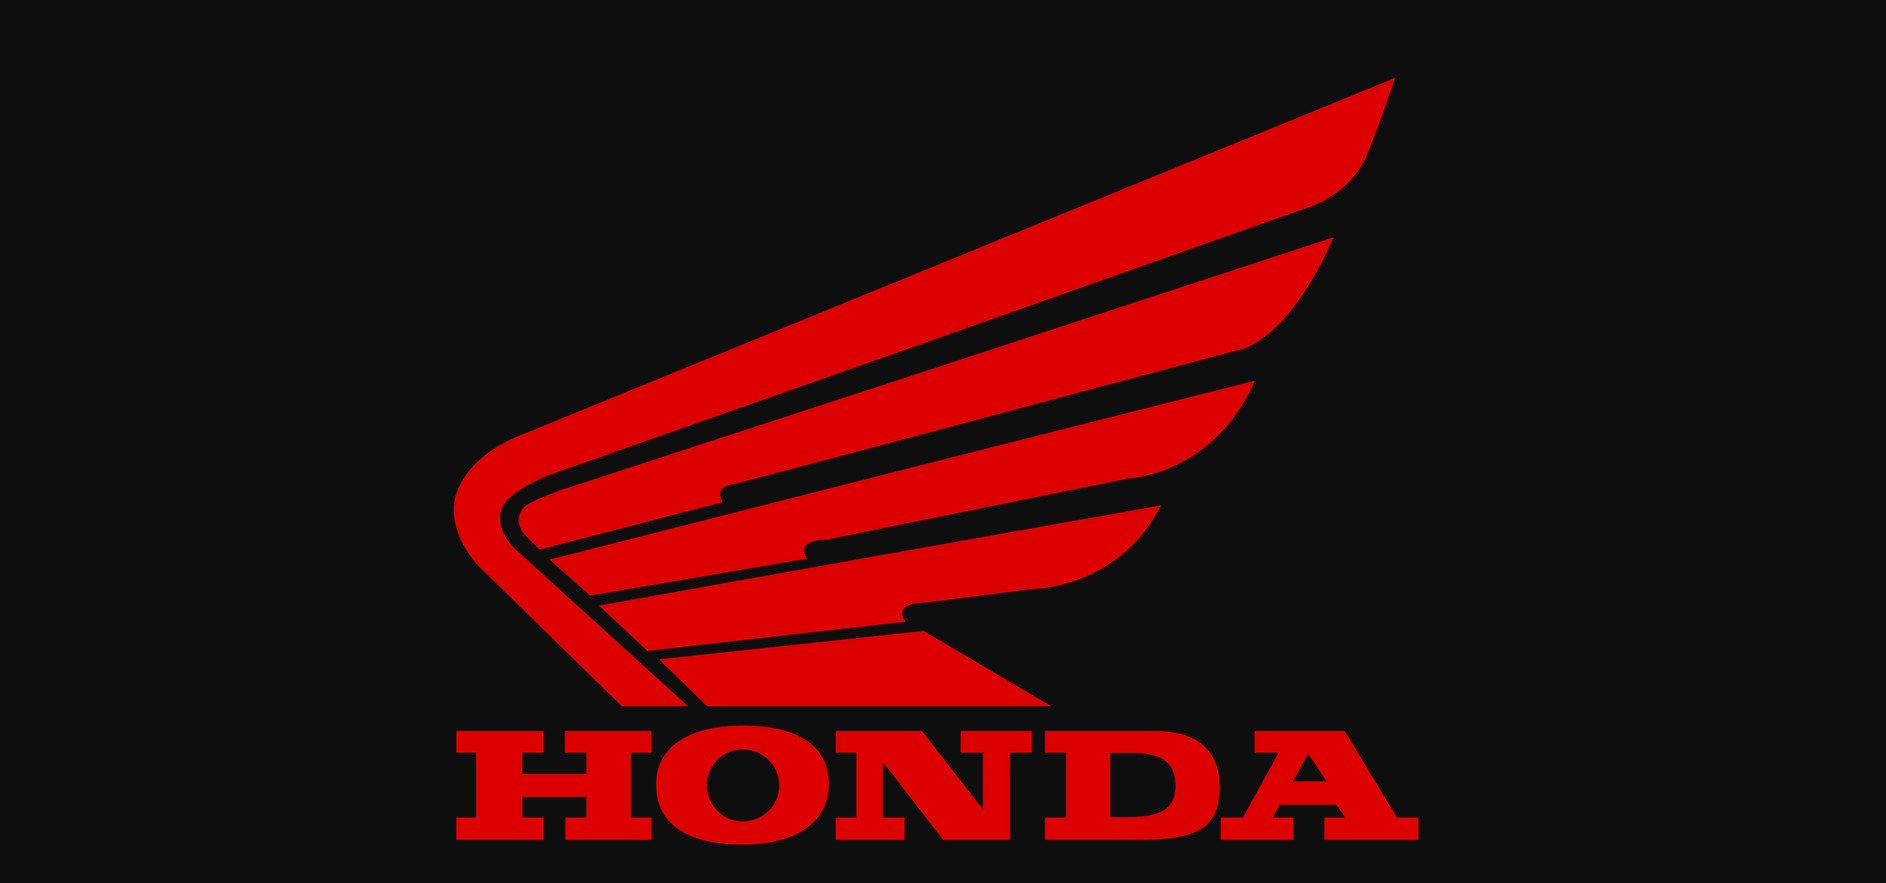 Honda renews the Transalp trademark, but does it mean anything ...